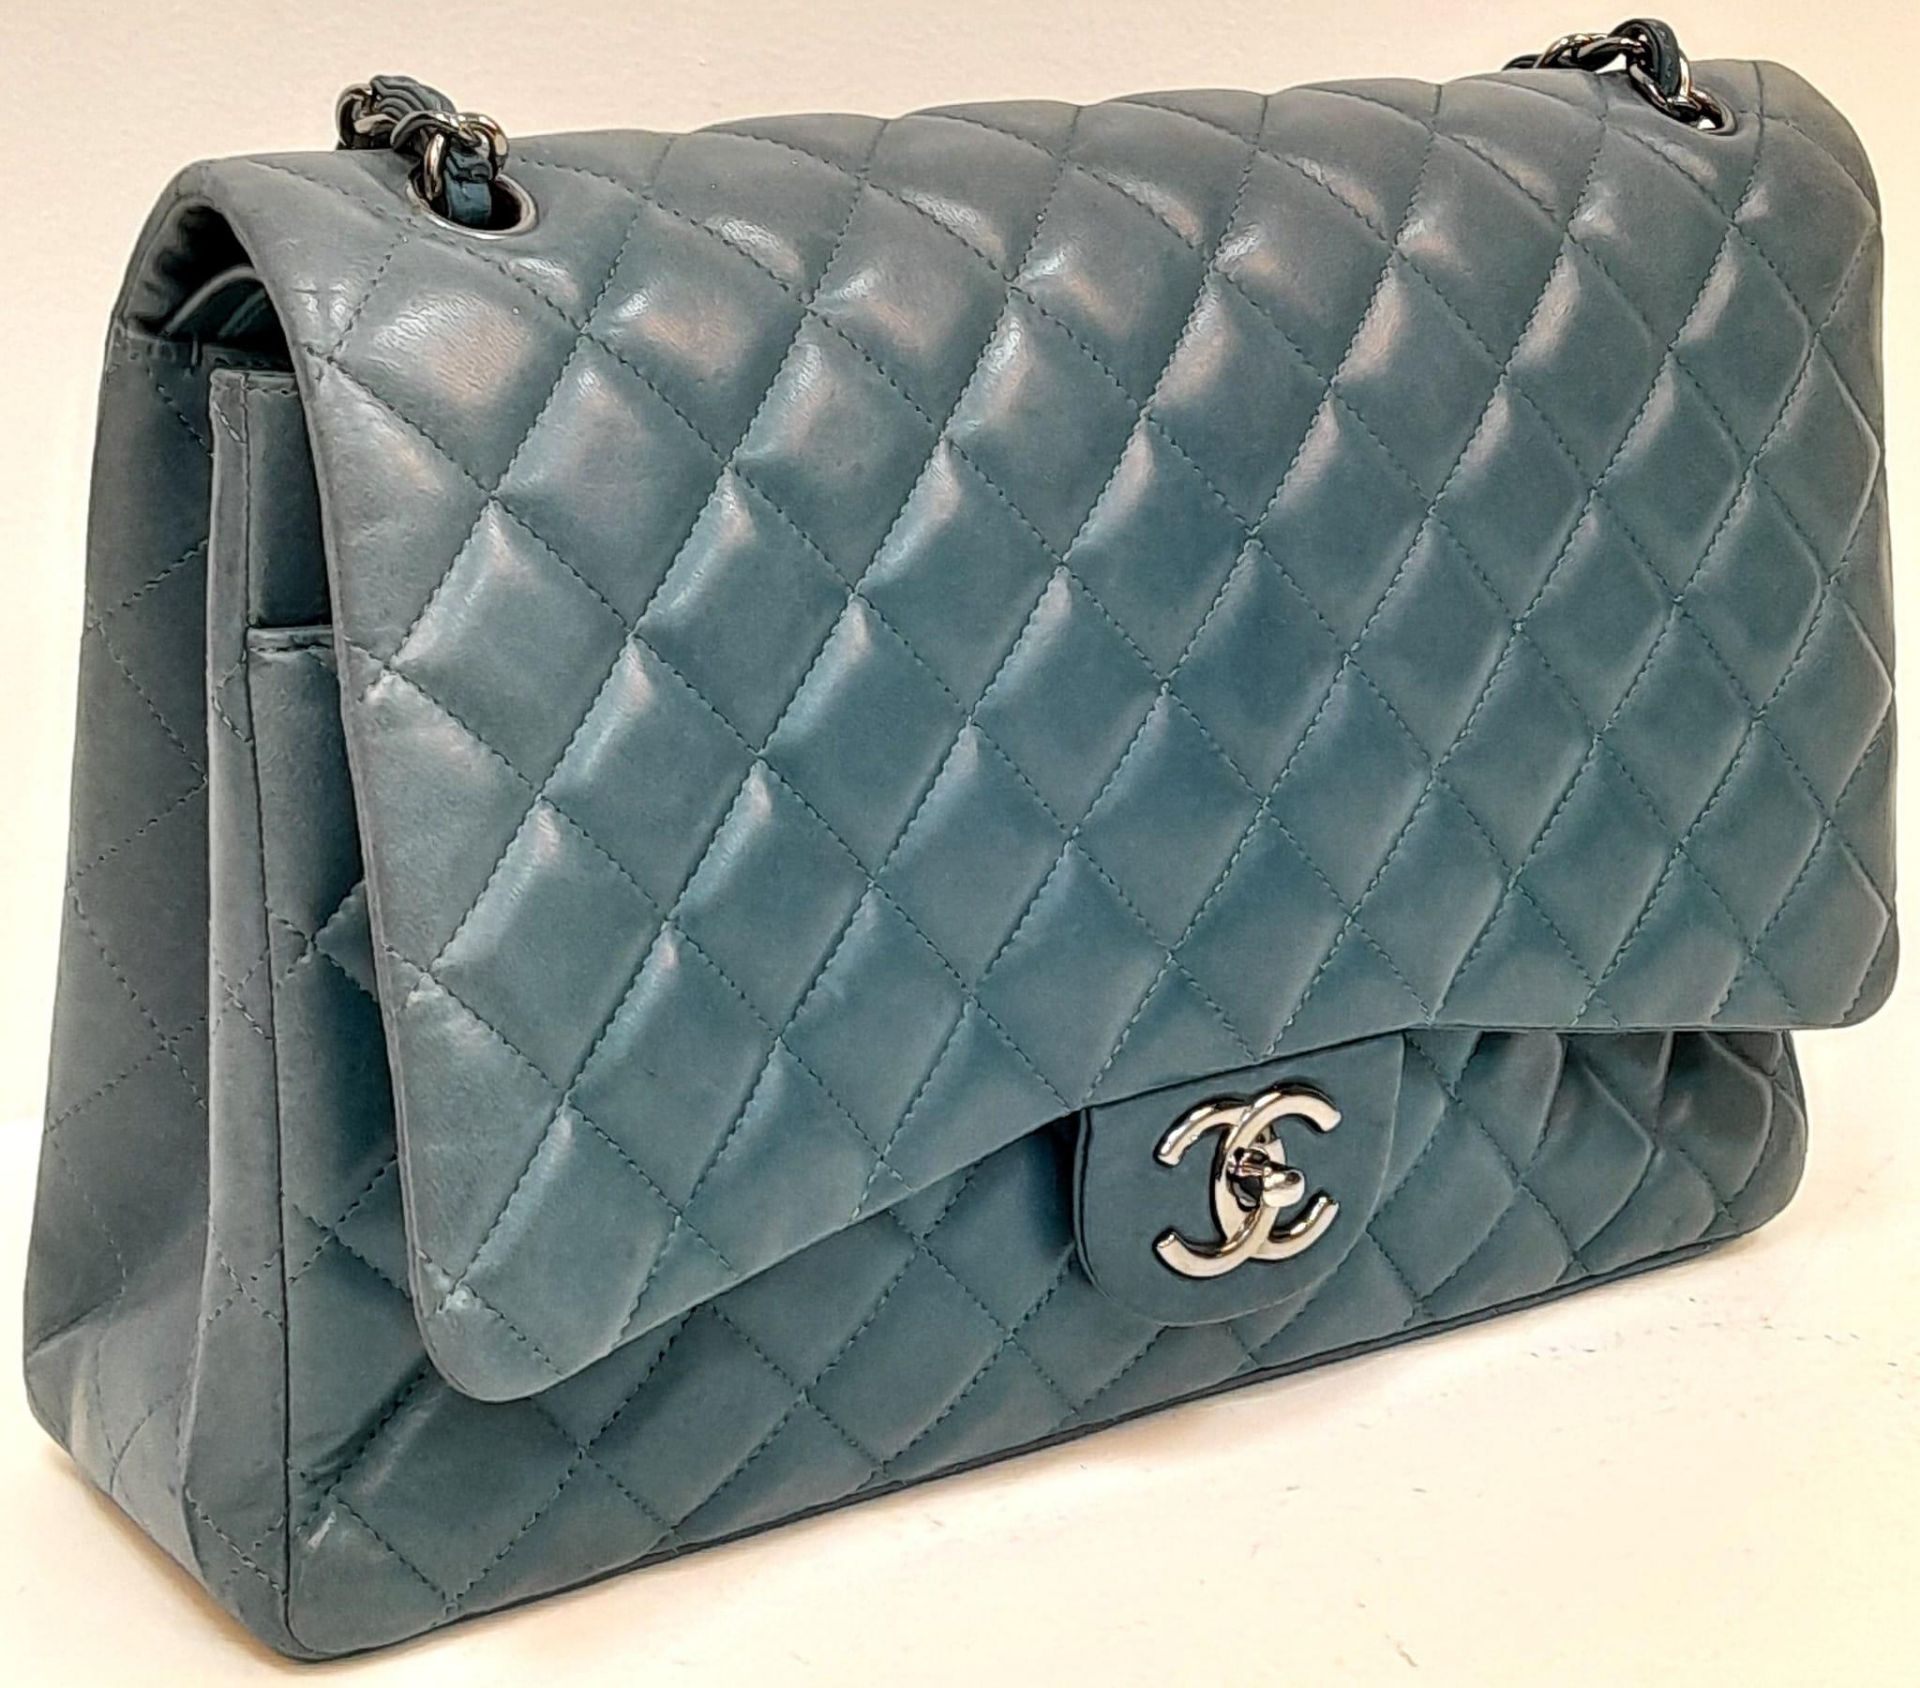 A Chanel Teal Jumbo Classic Double Flap Bag. Quilted leather exterior with silver-toned hardware, - Image 7 of 14